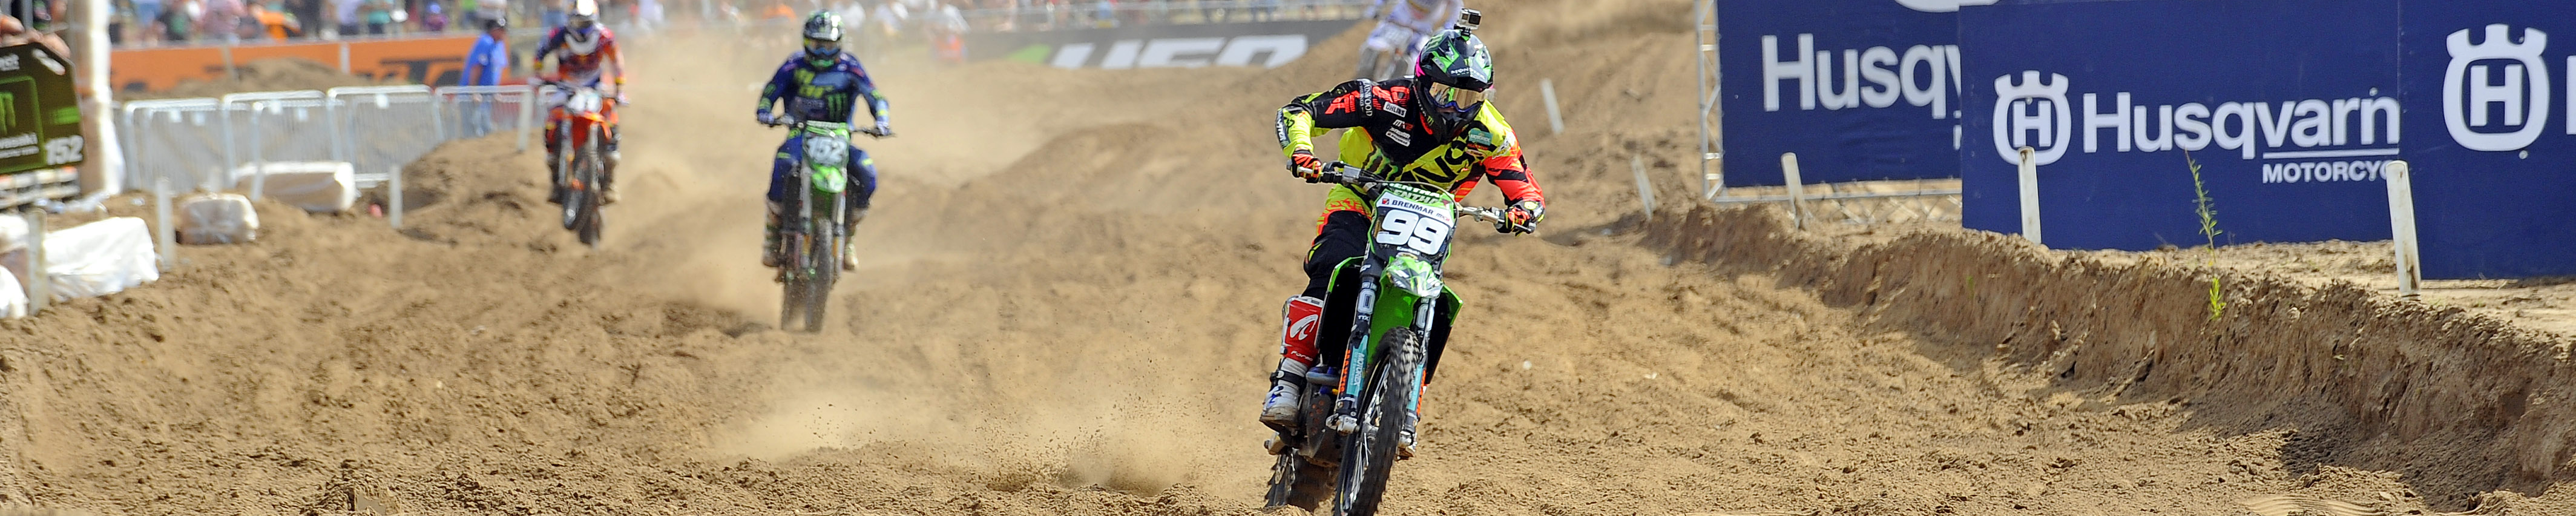 Maxxis-sponsored Anstie doubles up with Lombardia Grand Prix victory